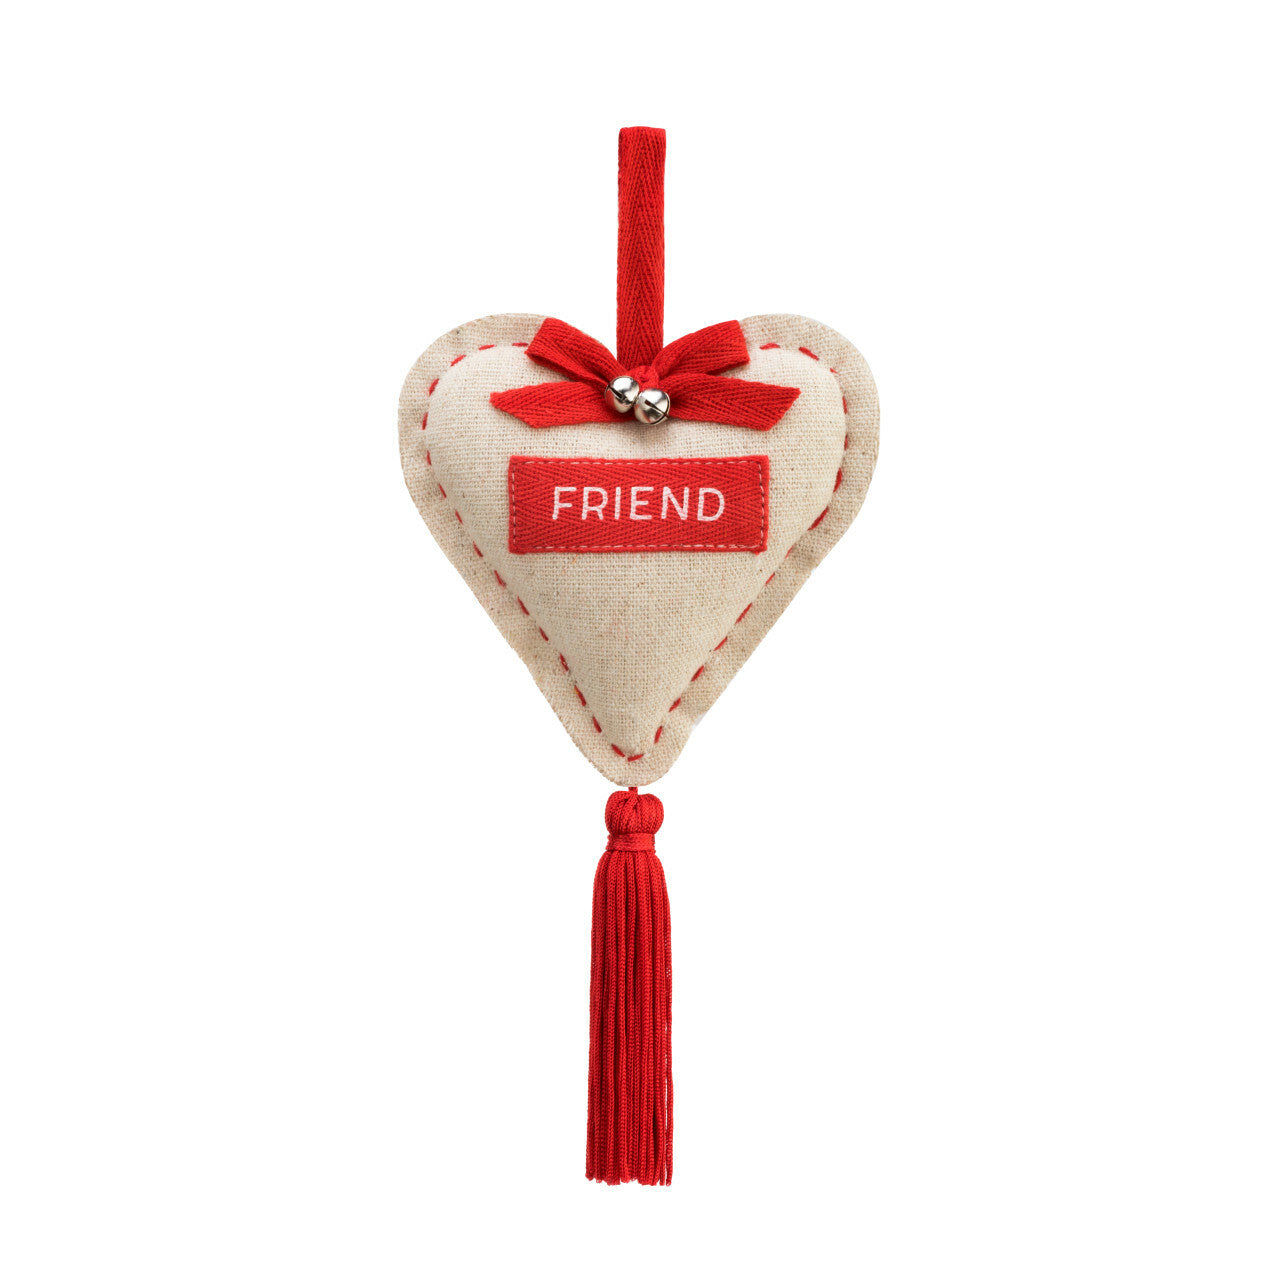 Daughter / Friend Heart Tassel Ornament | Red And Beige Polyester Ornament